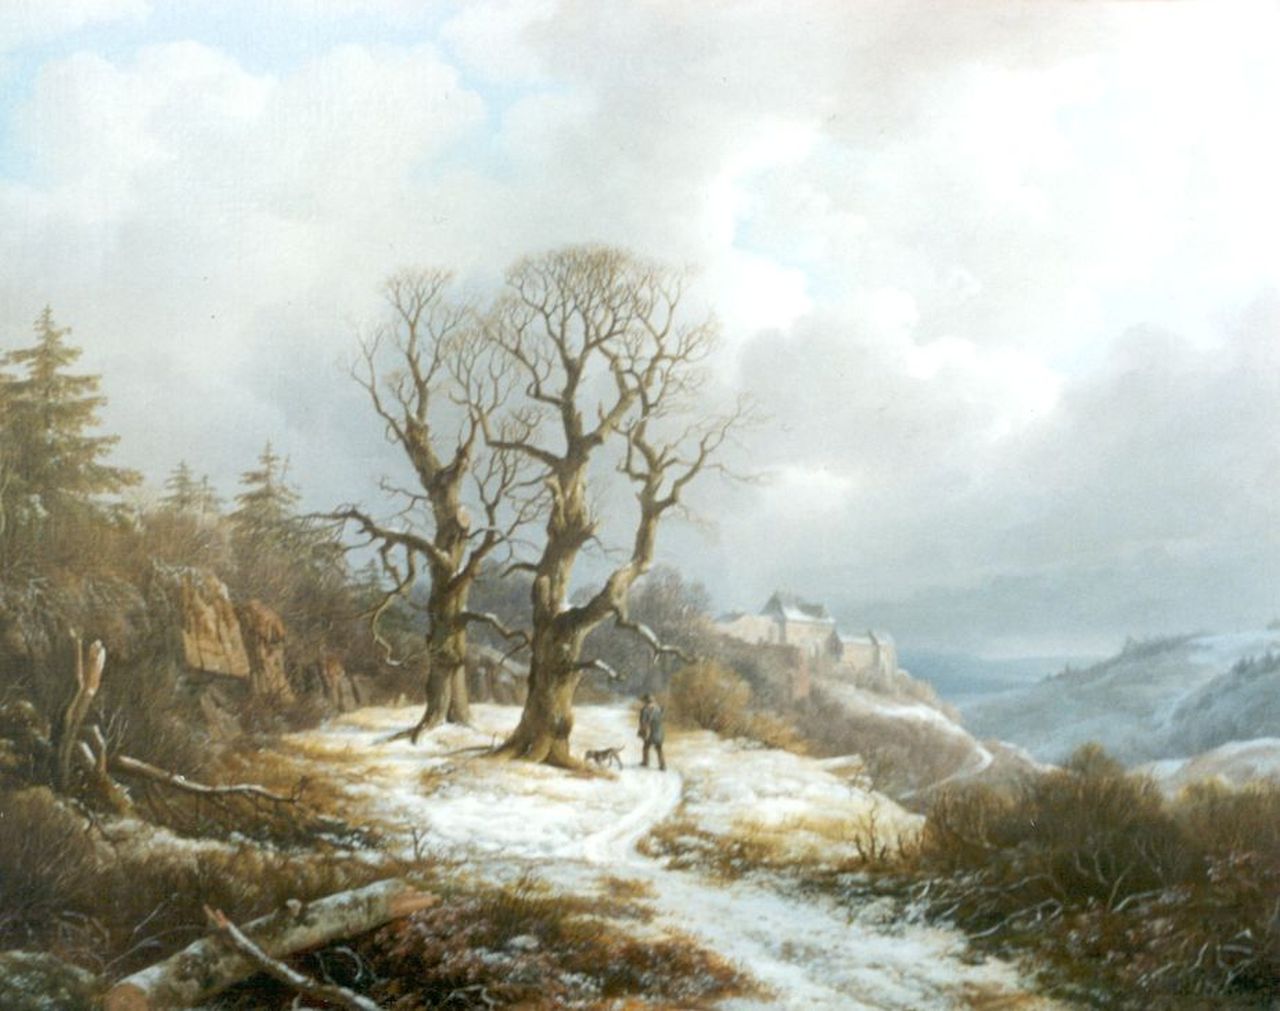 Haanen R.A.  | Remigius Adrianus Haanen, A Hunter in a Winter Landscape, oil on canvas 51.8 x 65.4 cm, signed c.r. and dated 1835